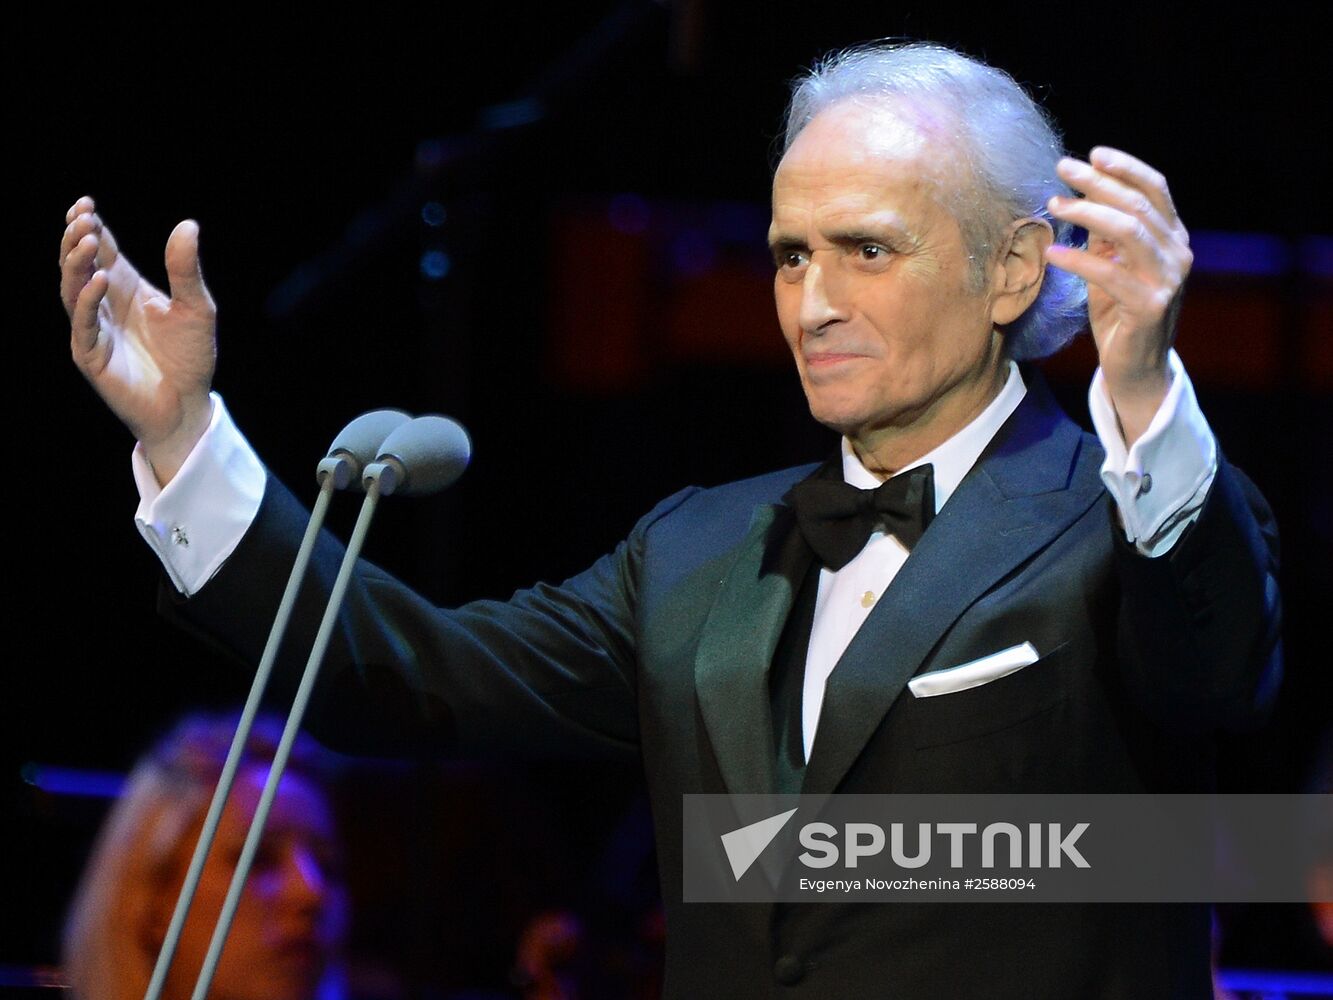 Jose Carreras gives concert in Moscow